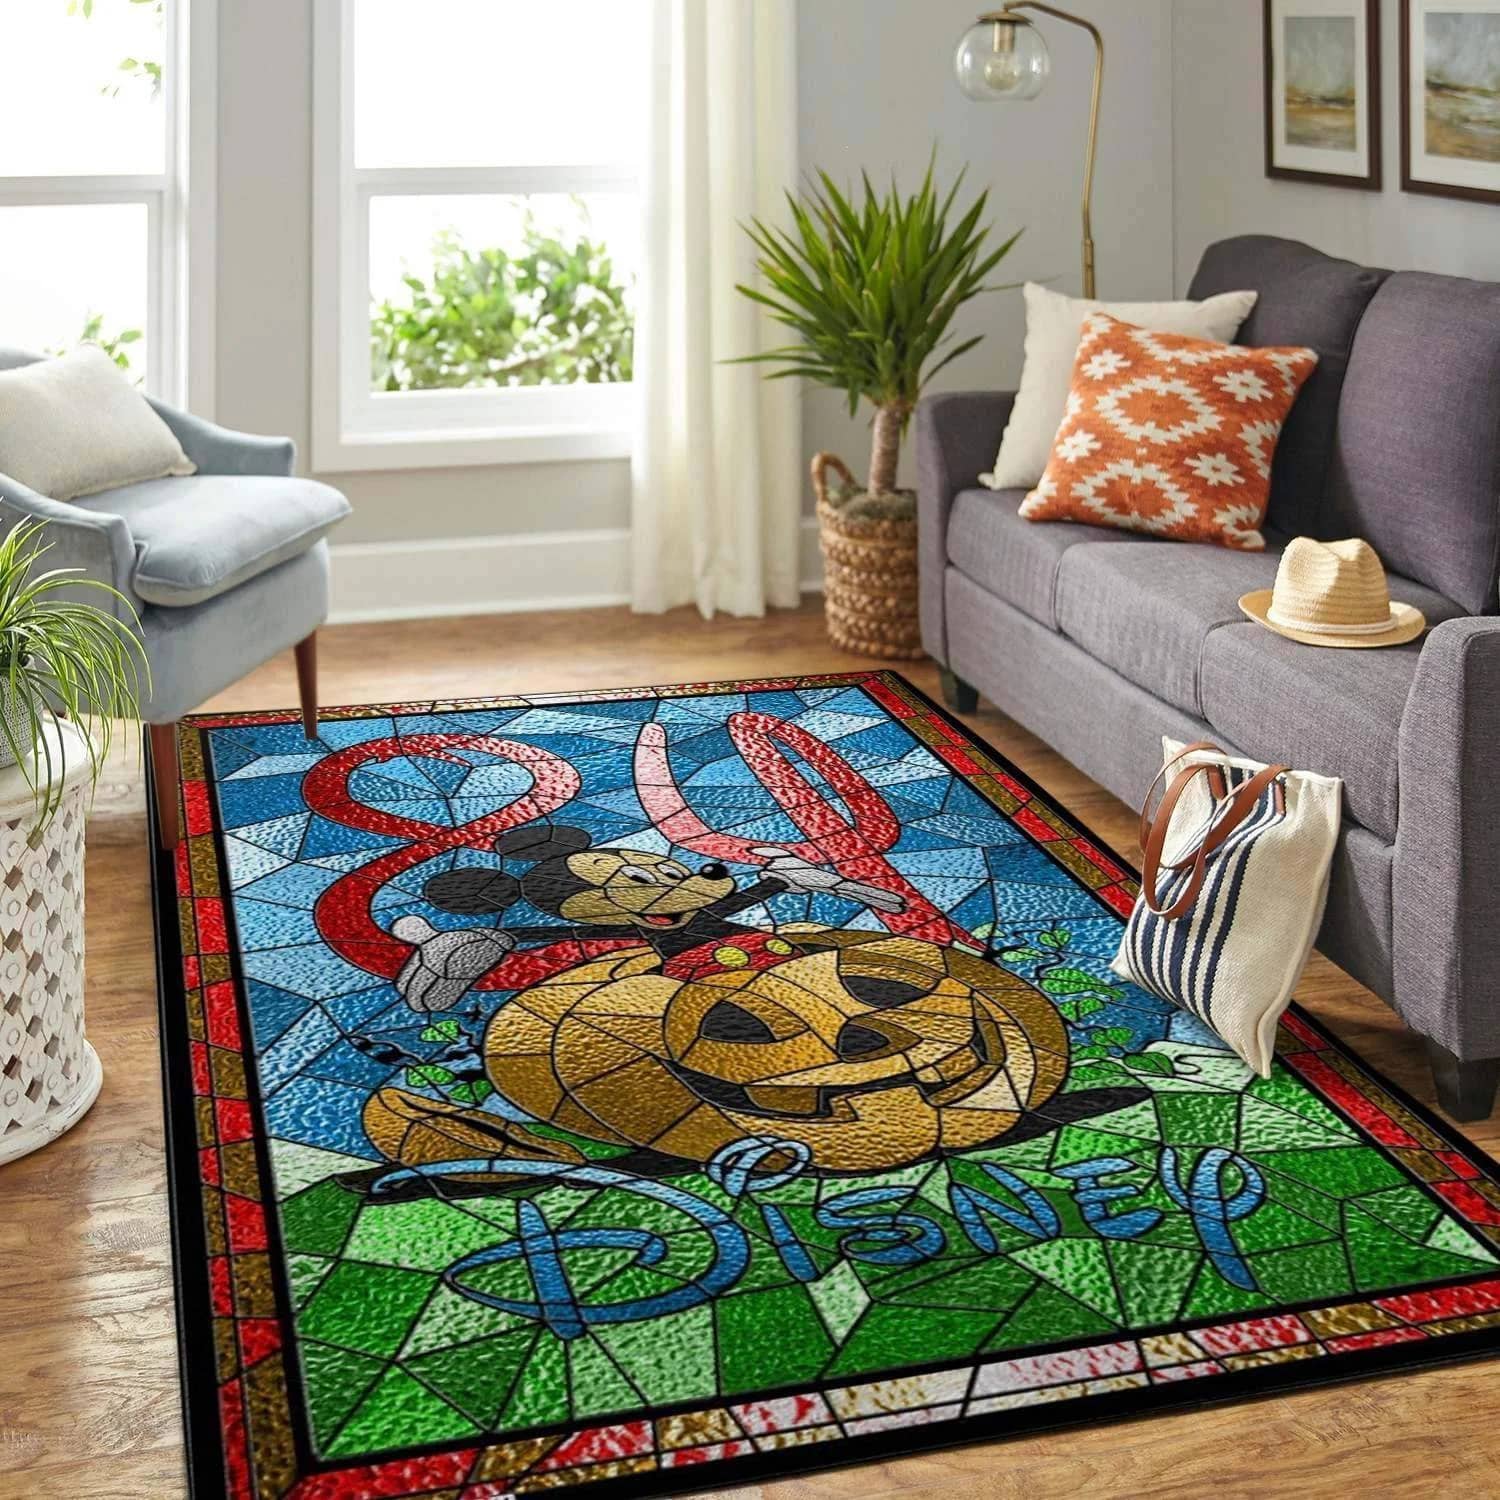 Disney Charater Mickey Mouse Area Limited Edition Amazon Best Seller Sku 265236 Rug